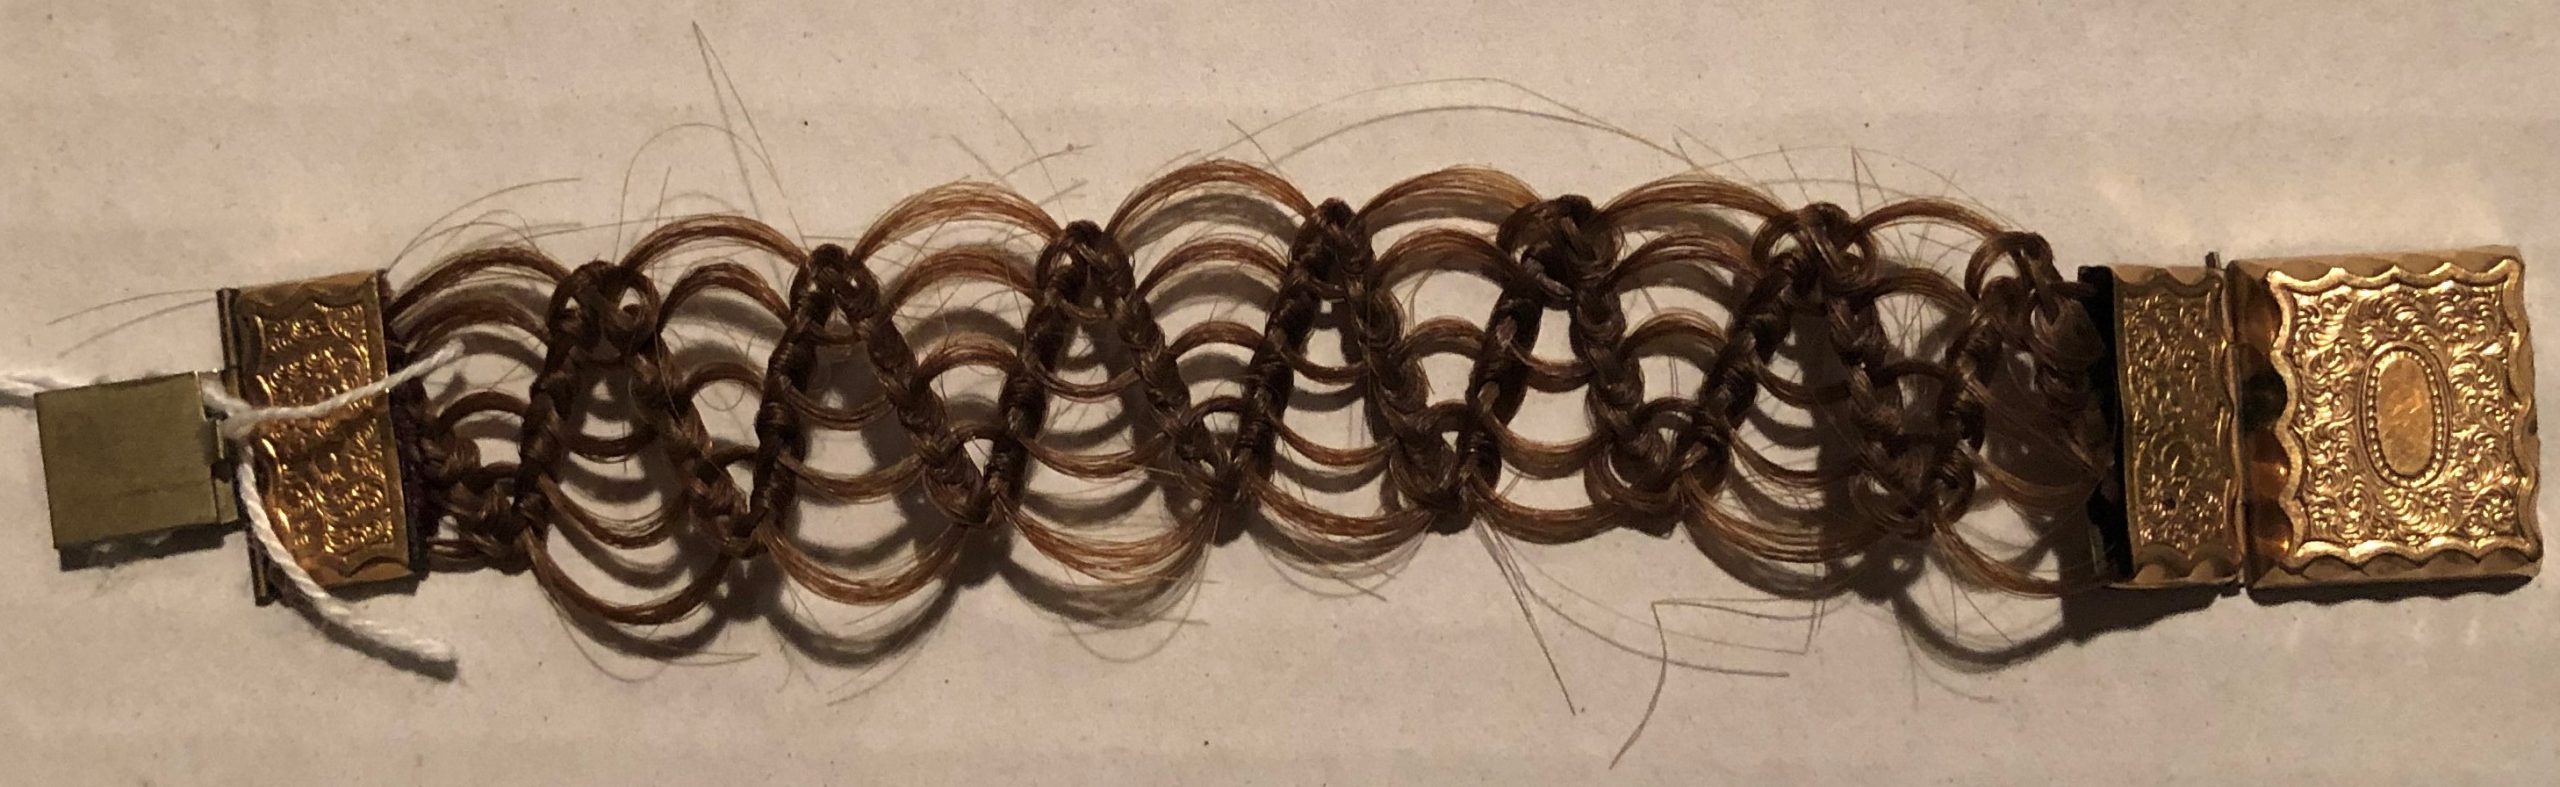 Hairwork bracelet from the Morrison County Historical Society’s collection. Unknown donor but possibly Mary Harker, the daughter of Nathan Richardson. #0.0.161.